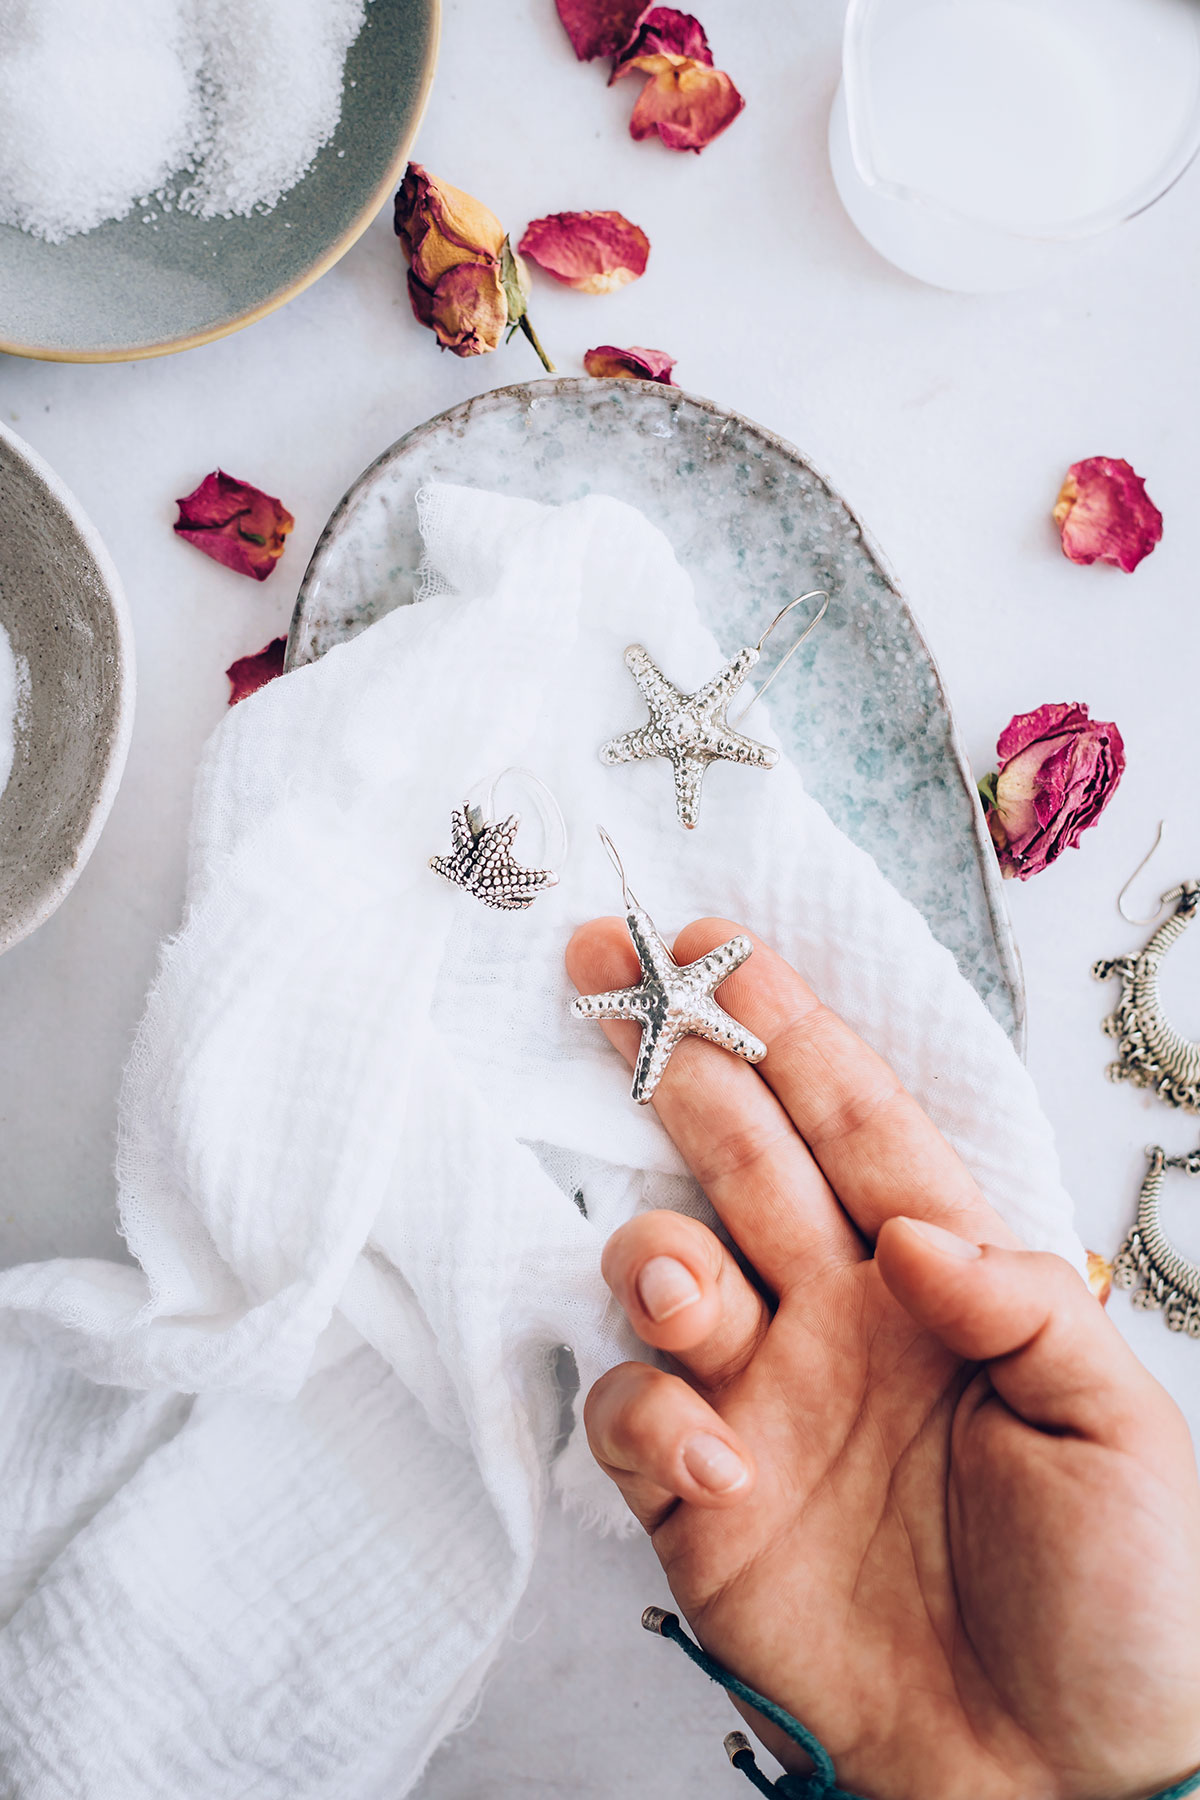 How To Make Your Own Jewelry Cleaner